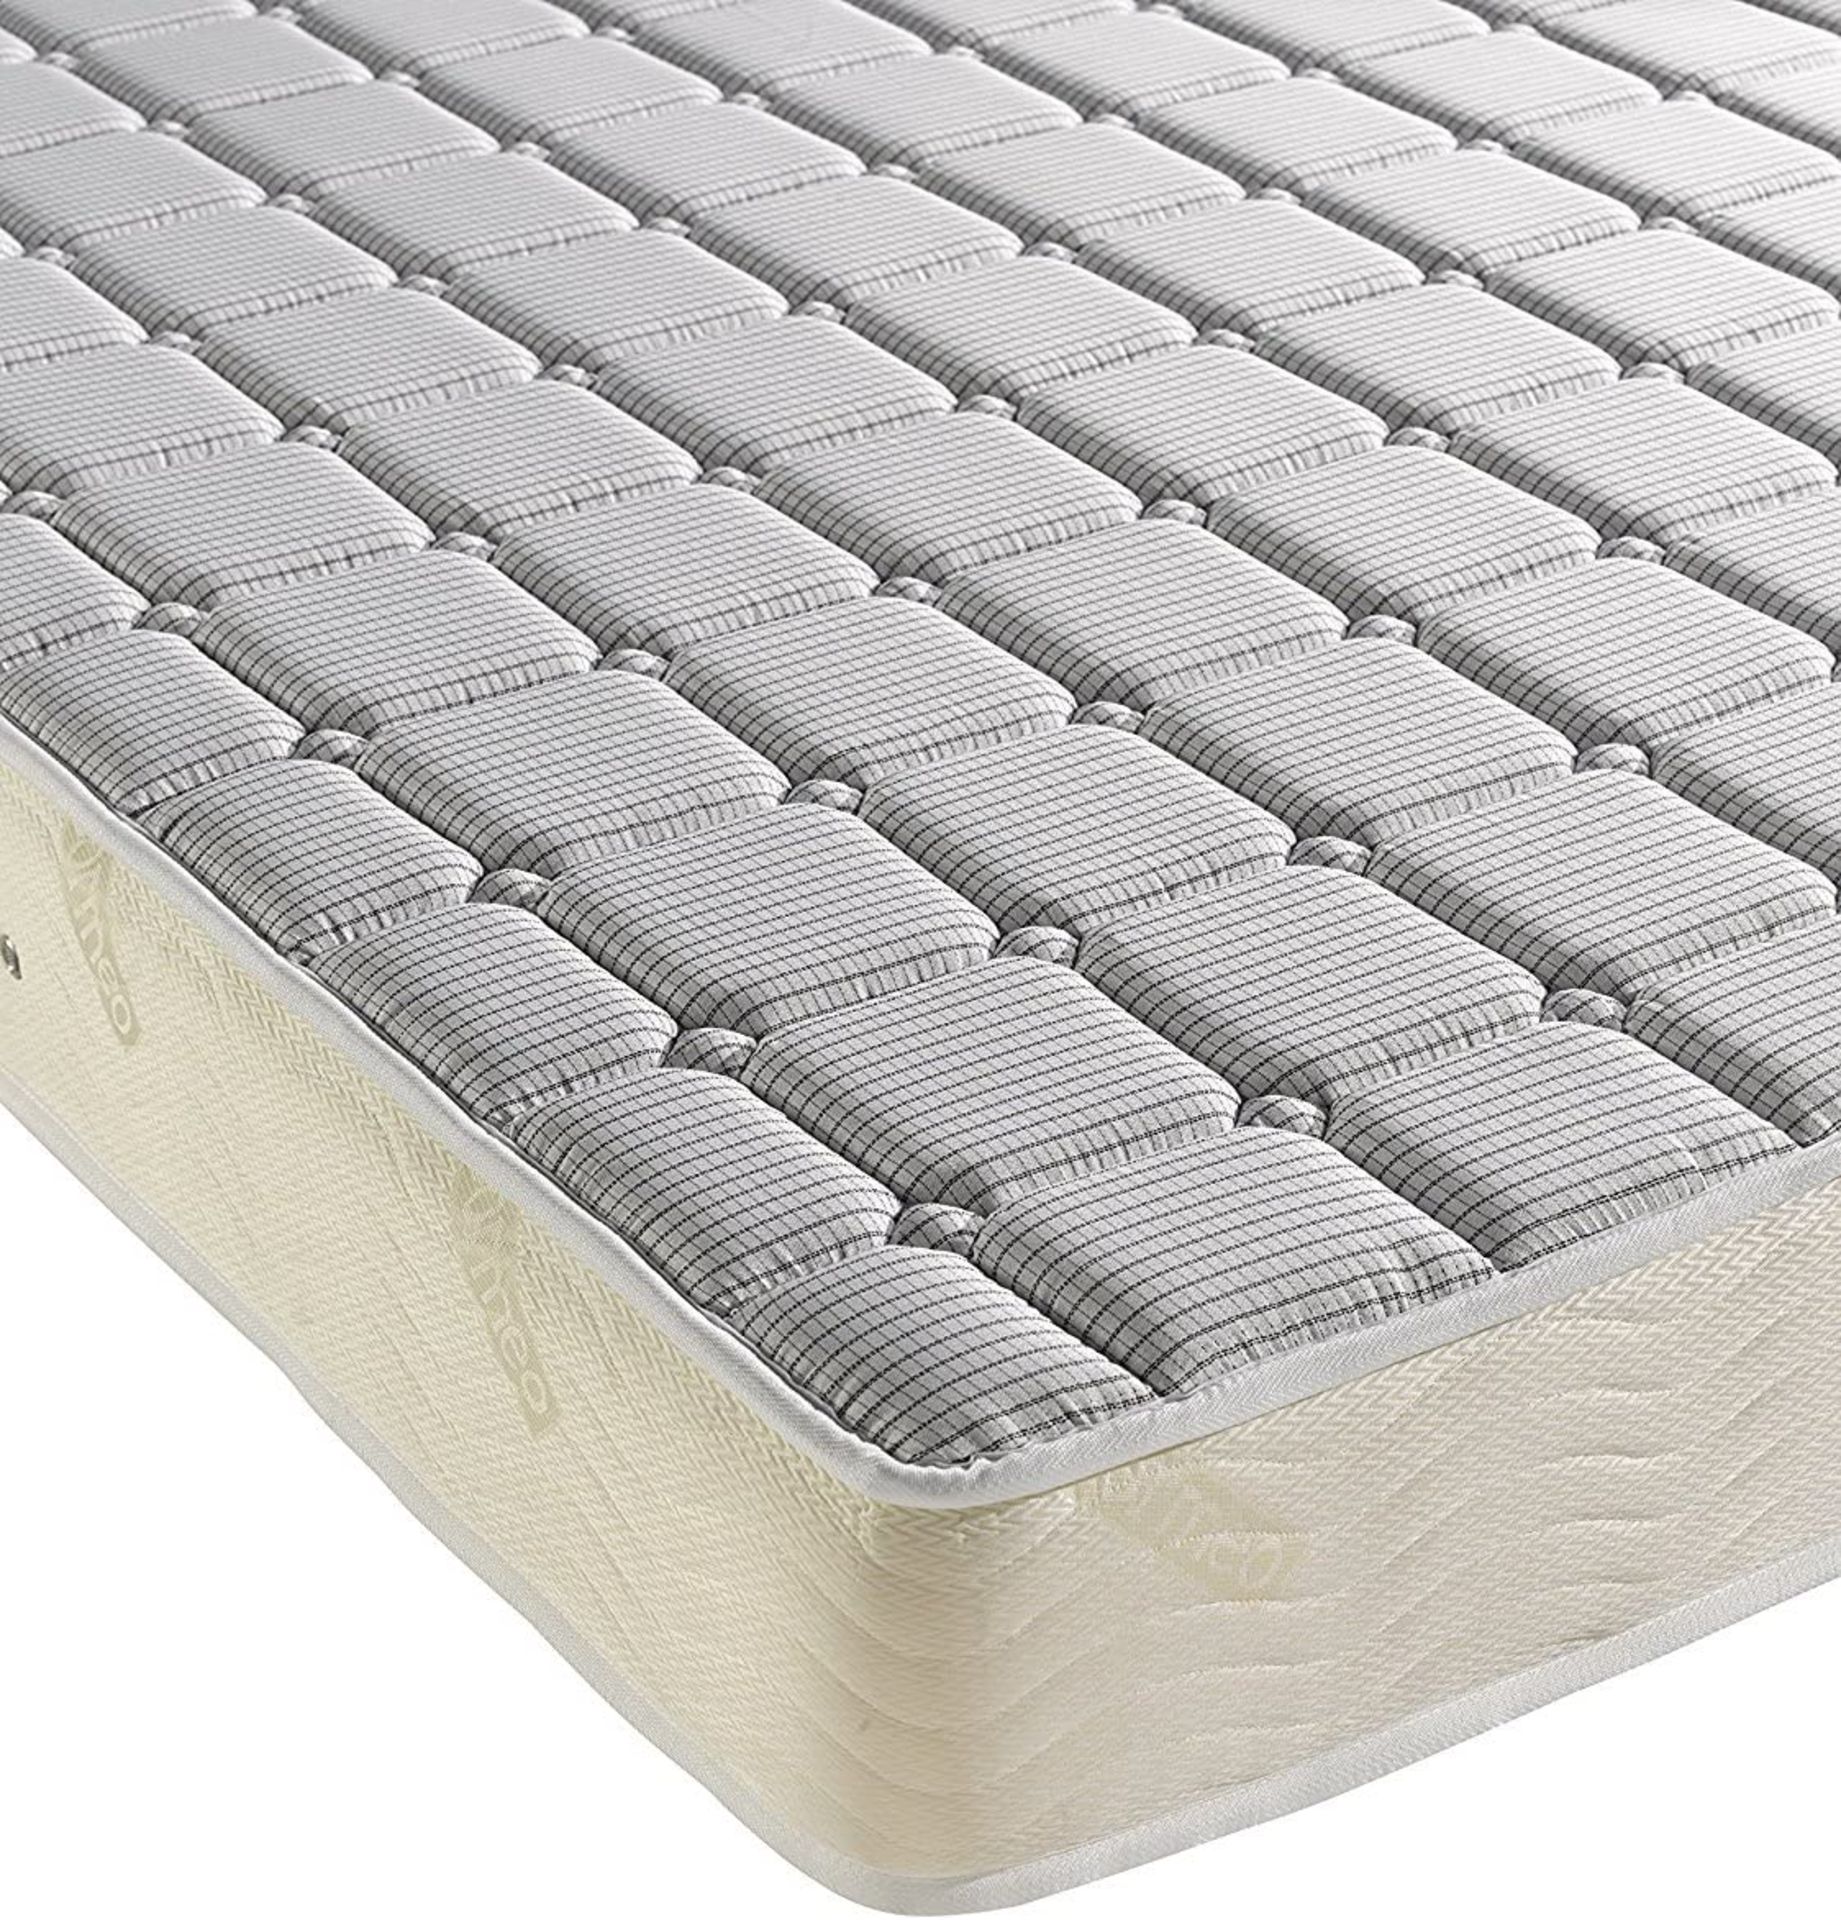 1 QUALITY 5FT KINGSIZE DORMEO MEMORY PLUS SPRUNG MATTRESS RRP Â£299 (VERY GOOD CONDITION, GENERIC